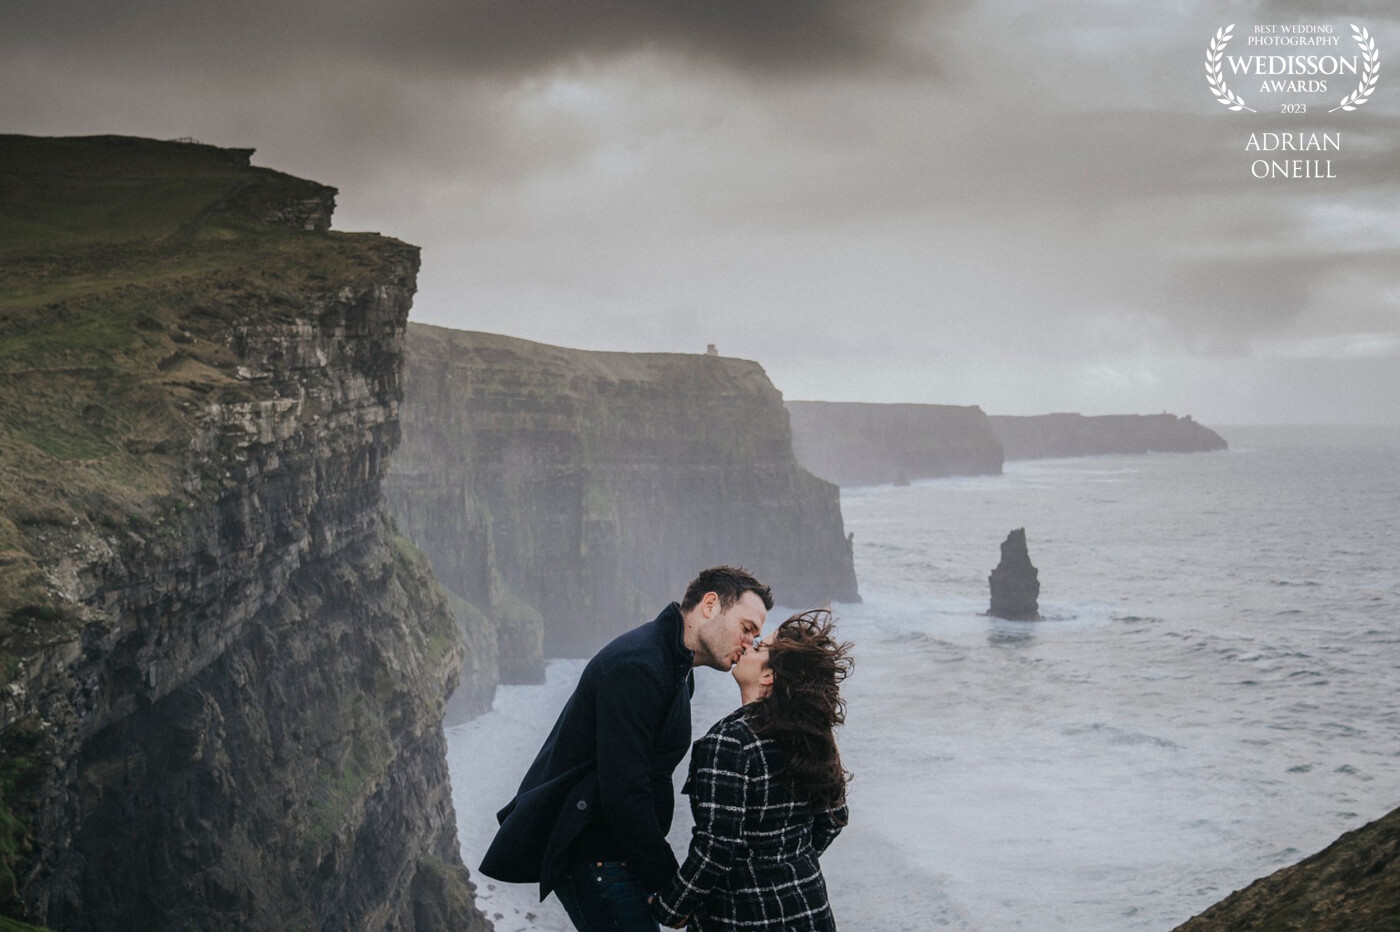 The Cliffs of Moher, Ireland, what can I say about this.....only its epic!!!!!! The couple flew in to Ireland specifically to have their engagement shoot at the Cliffs, it was an an amazing day